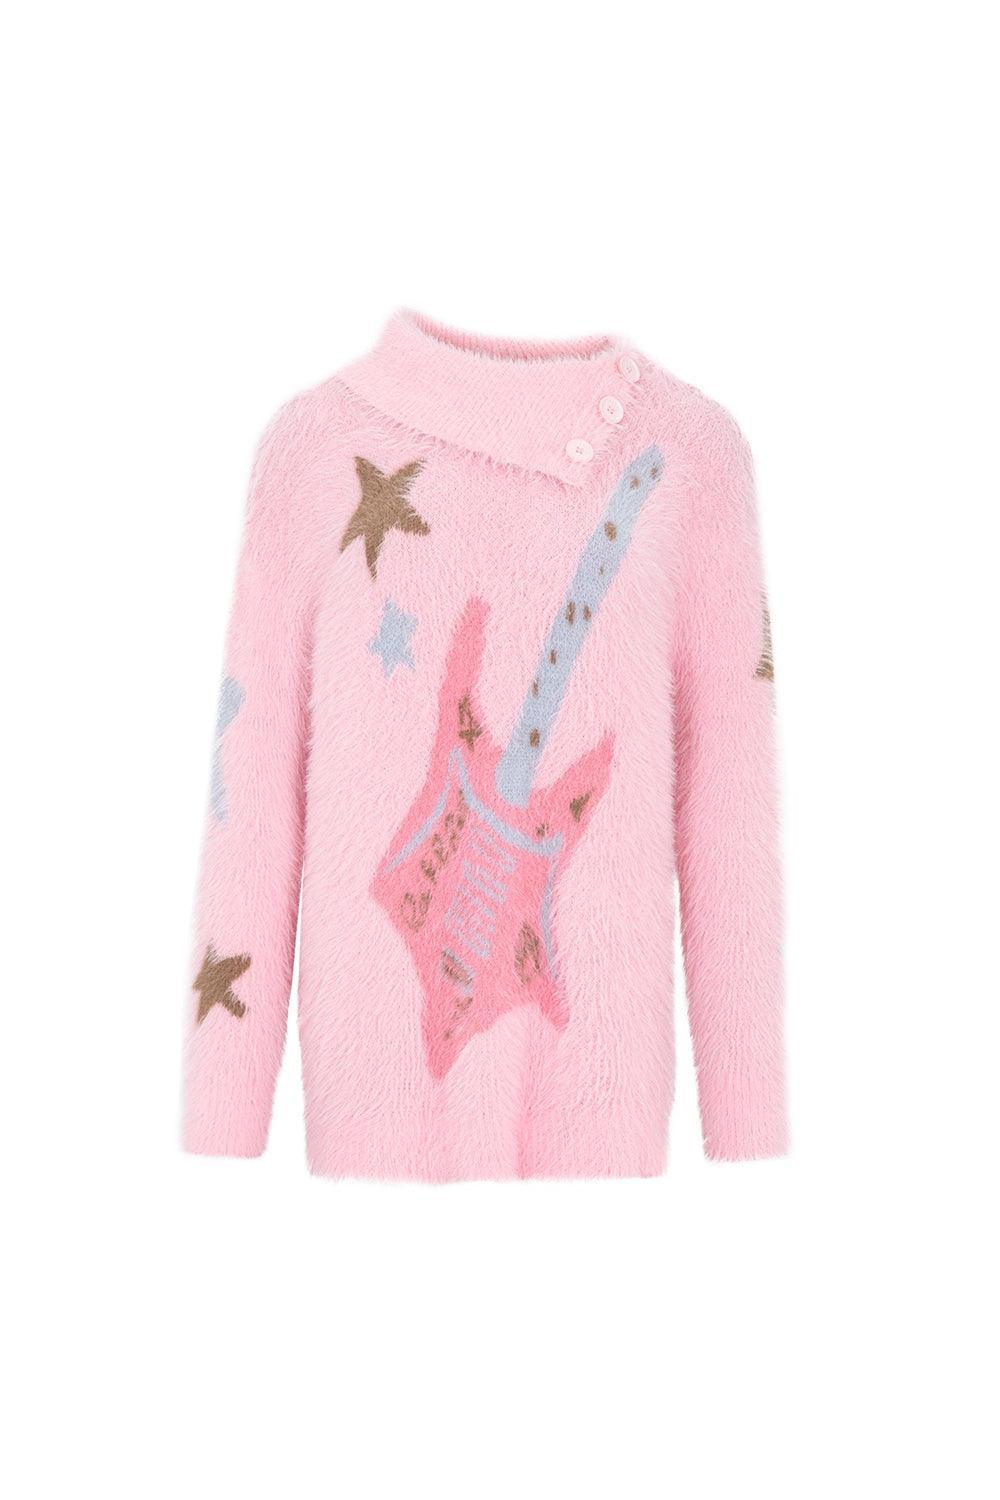 Bright Pink Warm Faux Fur Sweater with Stars - Pixie Rebels